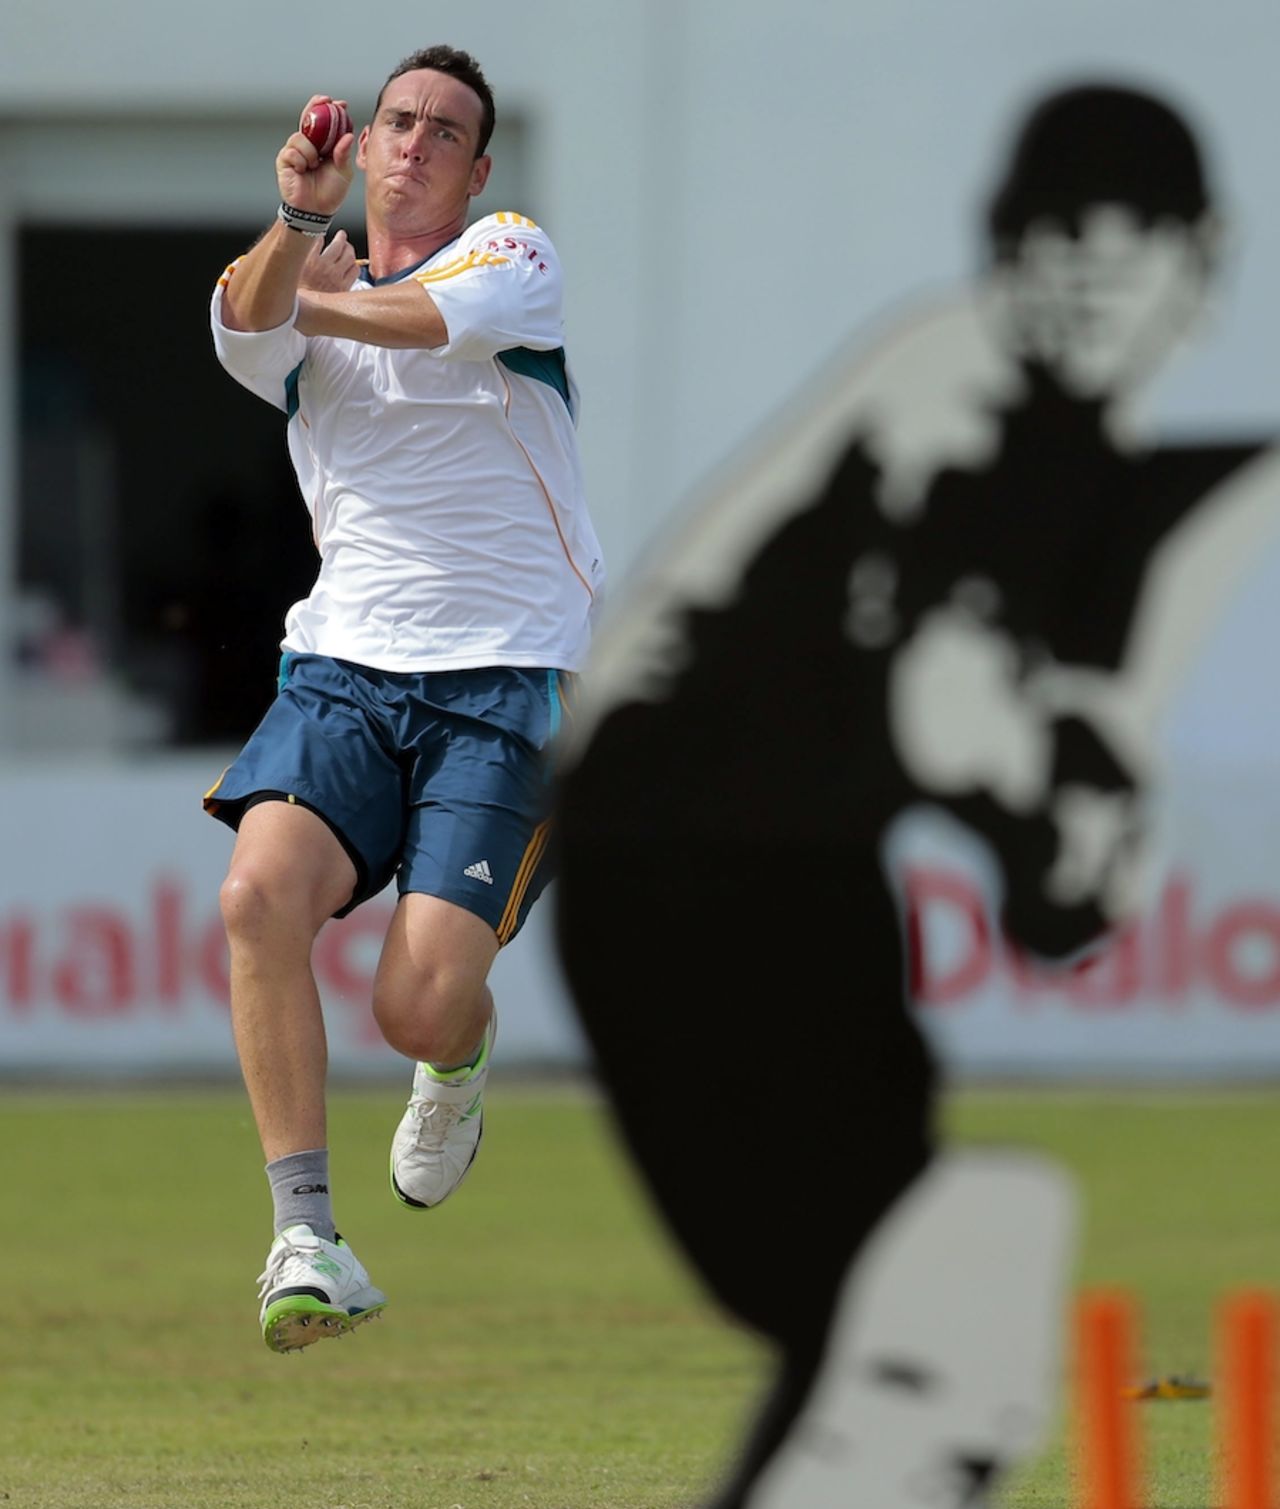 Kyle Abbott bowls at a target during practice, Galle, July 15, 2014